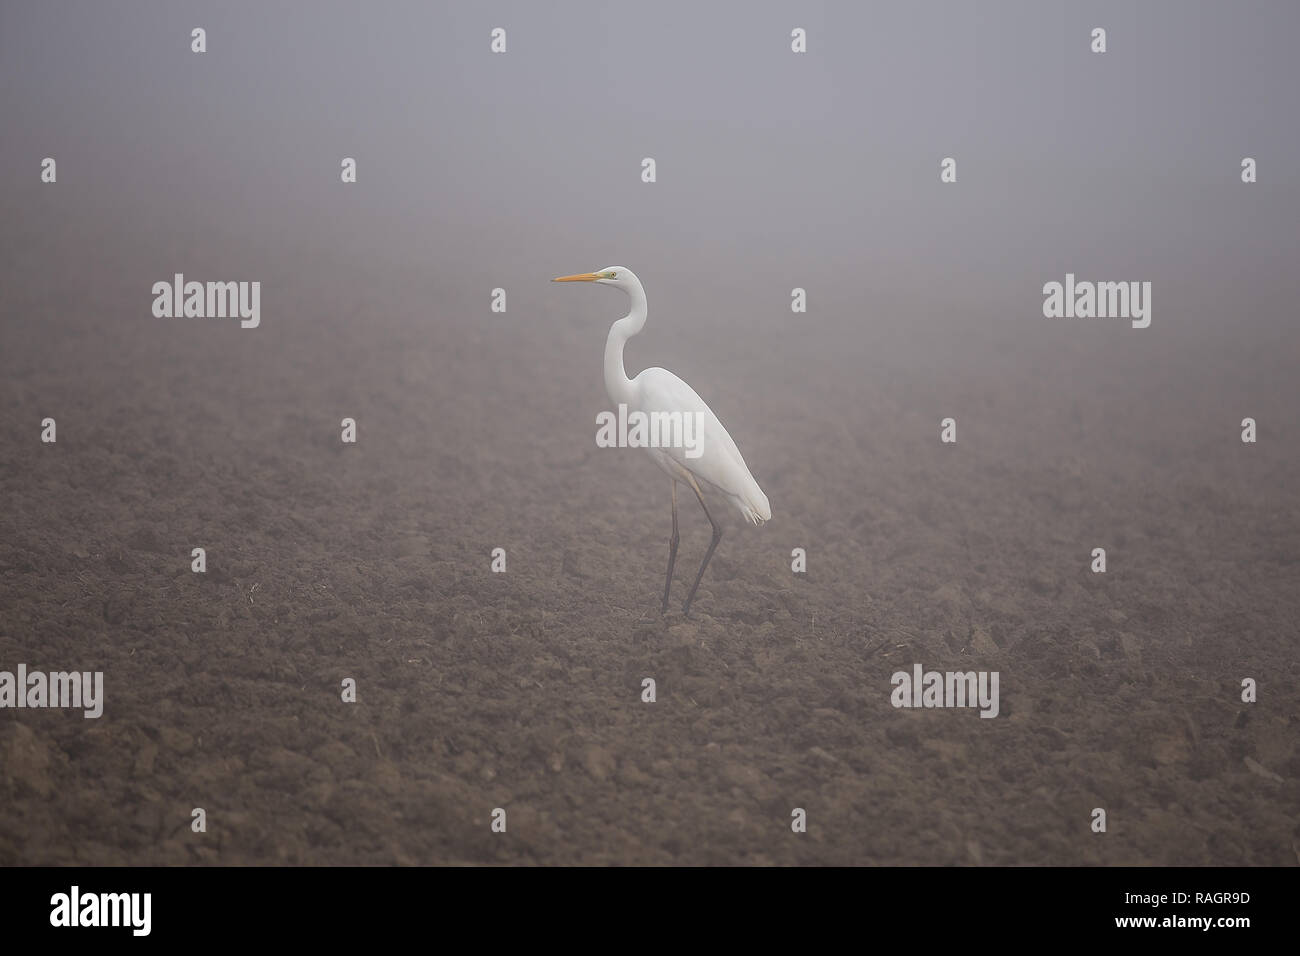 Great egret (Ardea alba), also known as the common egret, large egret, or great white heron. Standing on the field in fog. Stock Photo